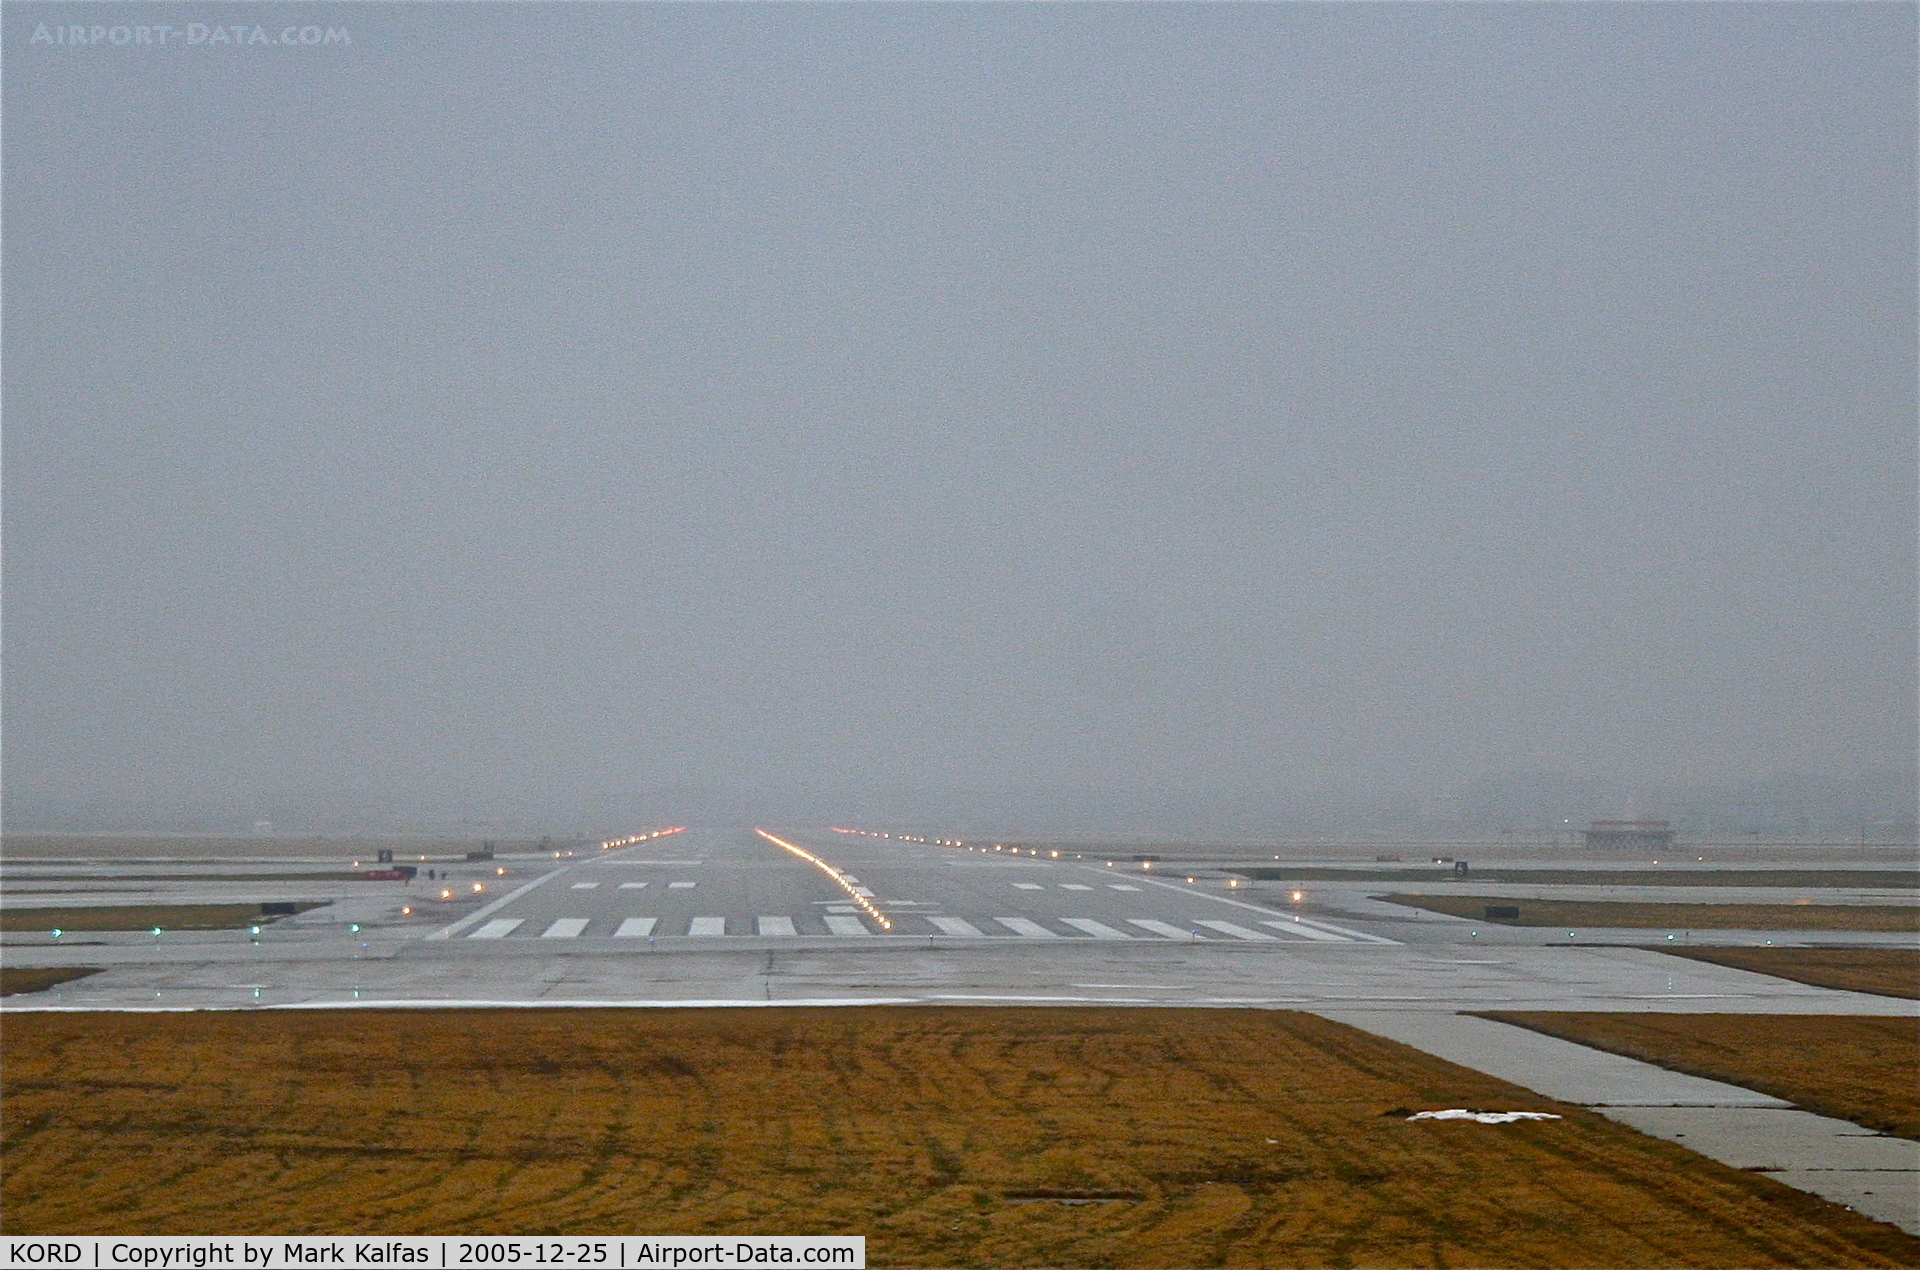 Chicago O'hare International Airport (ORD) - Runway 4L KORD